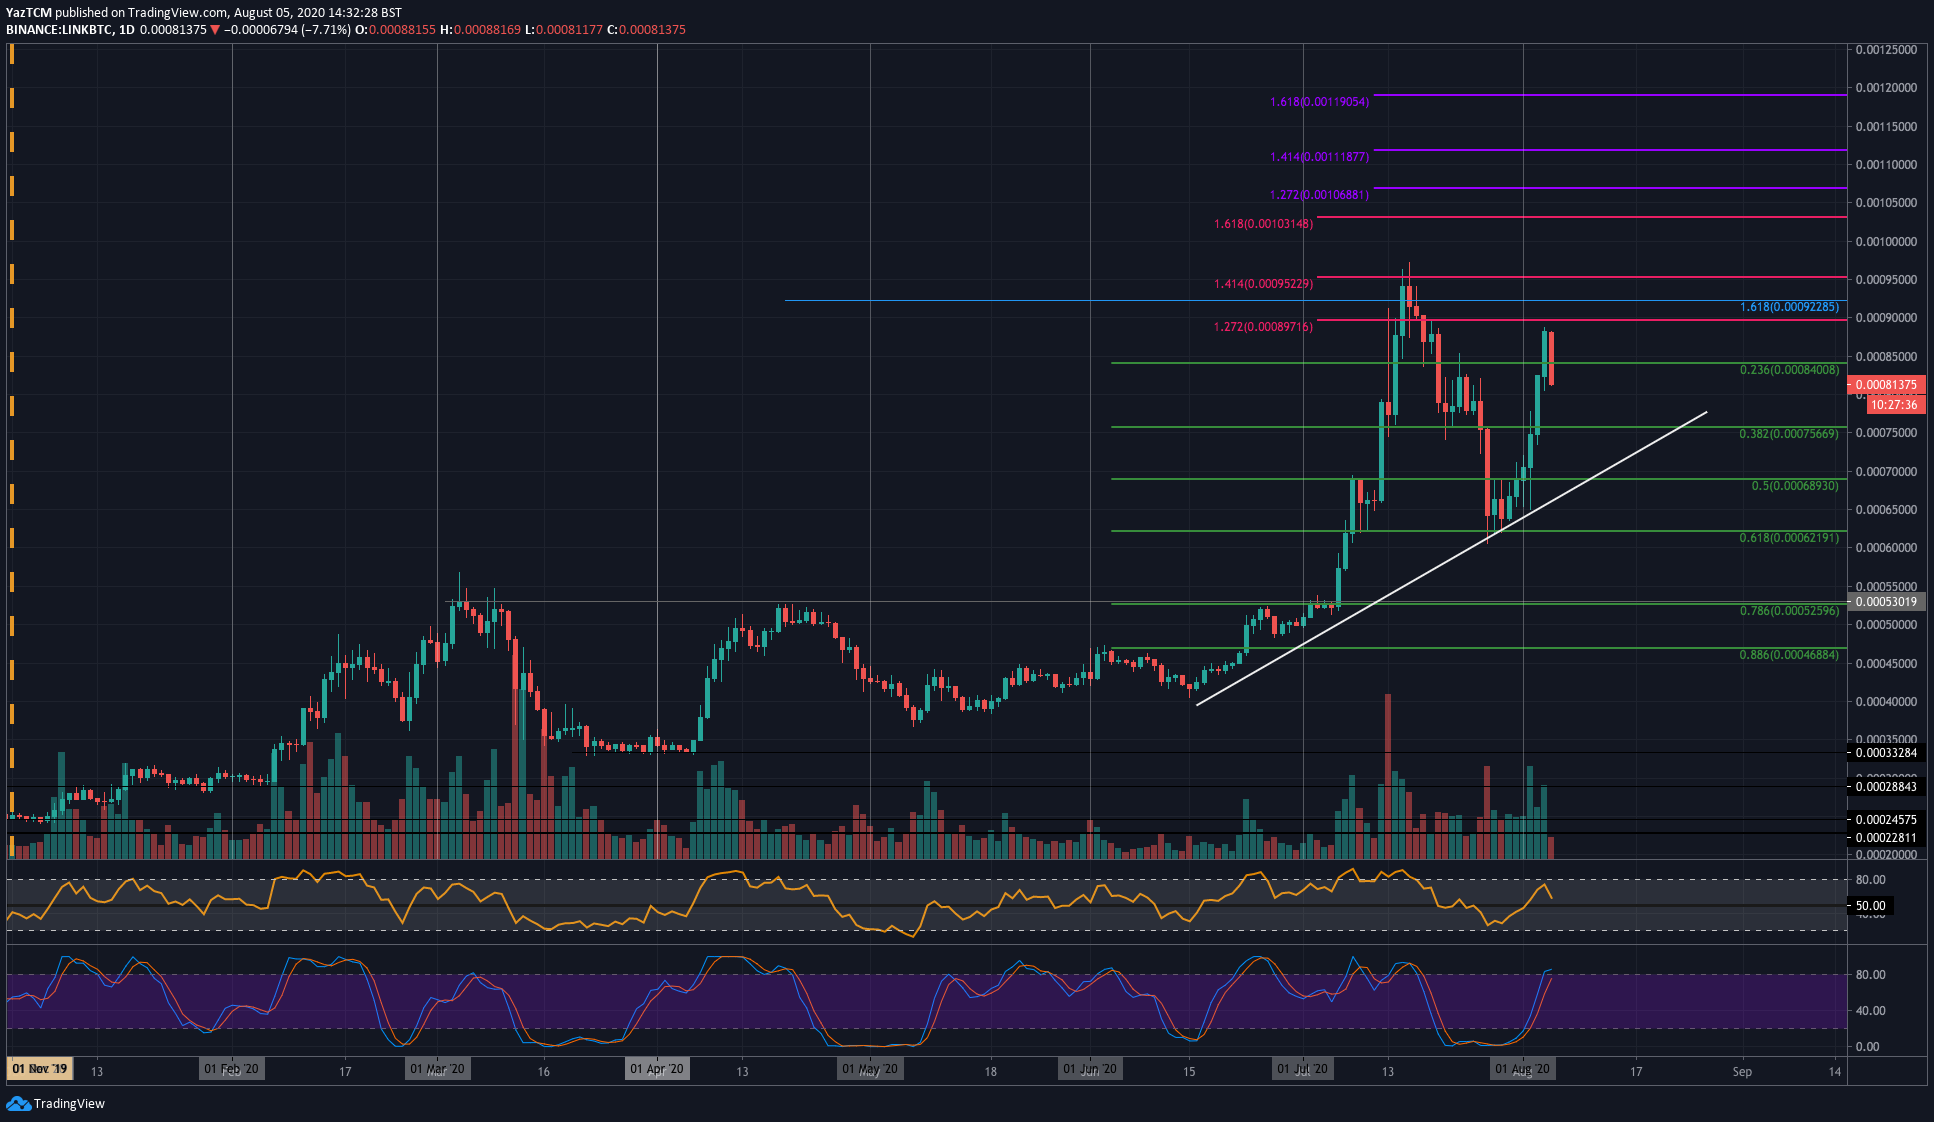 LINK Conquered $10 Moments Before Bitcoin’s Rally: Chainlink Price Analysis